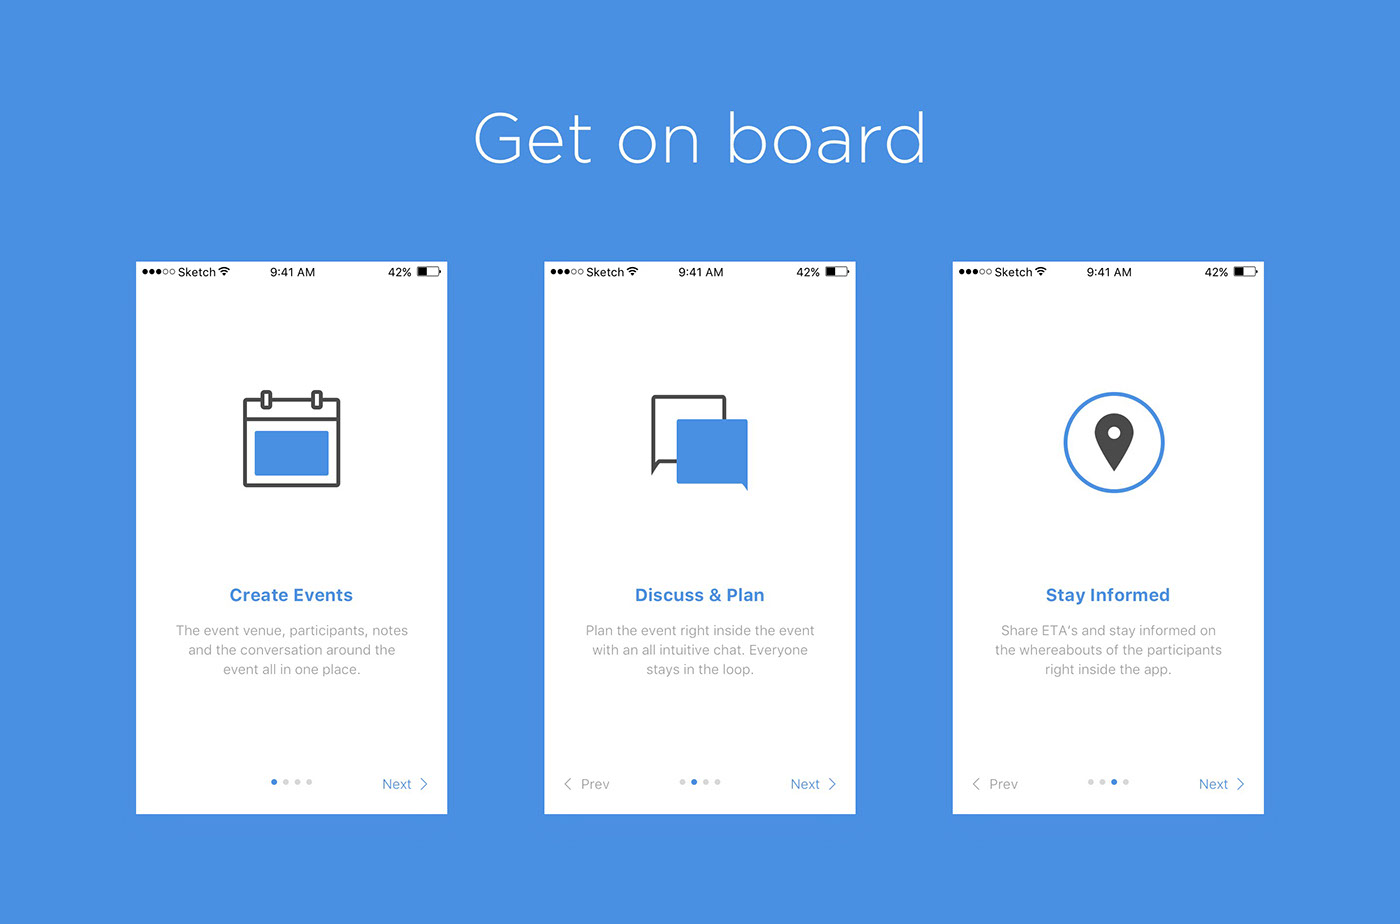 UI ux ios design Interface Onboarding mobile iphone app Experience